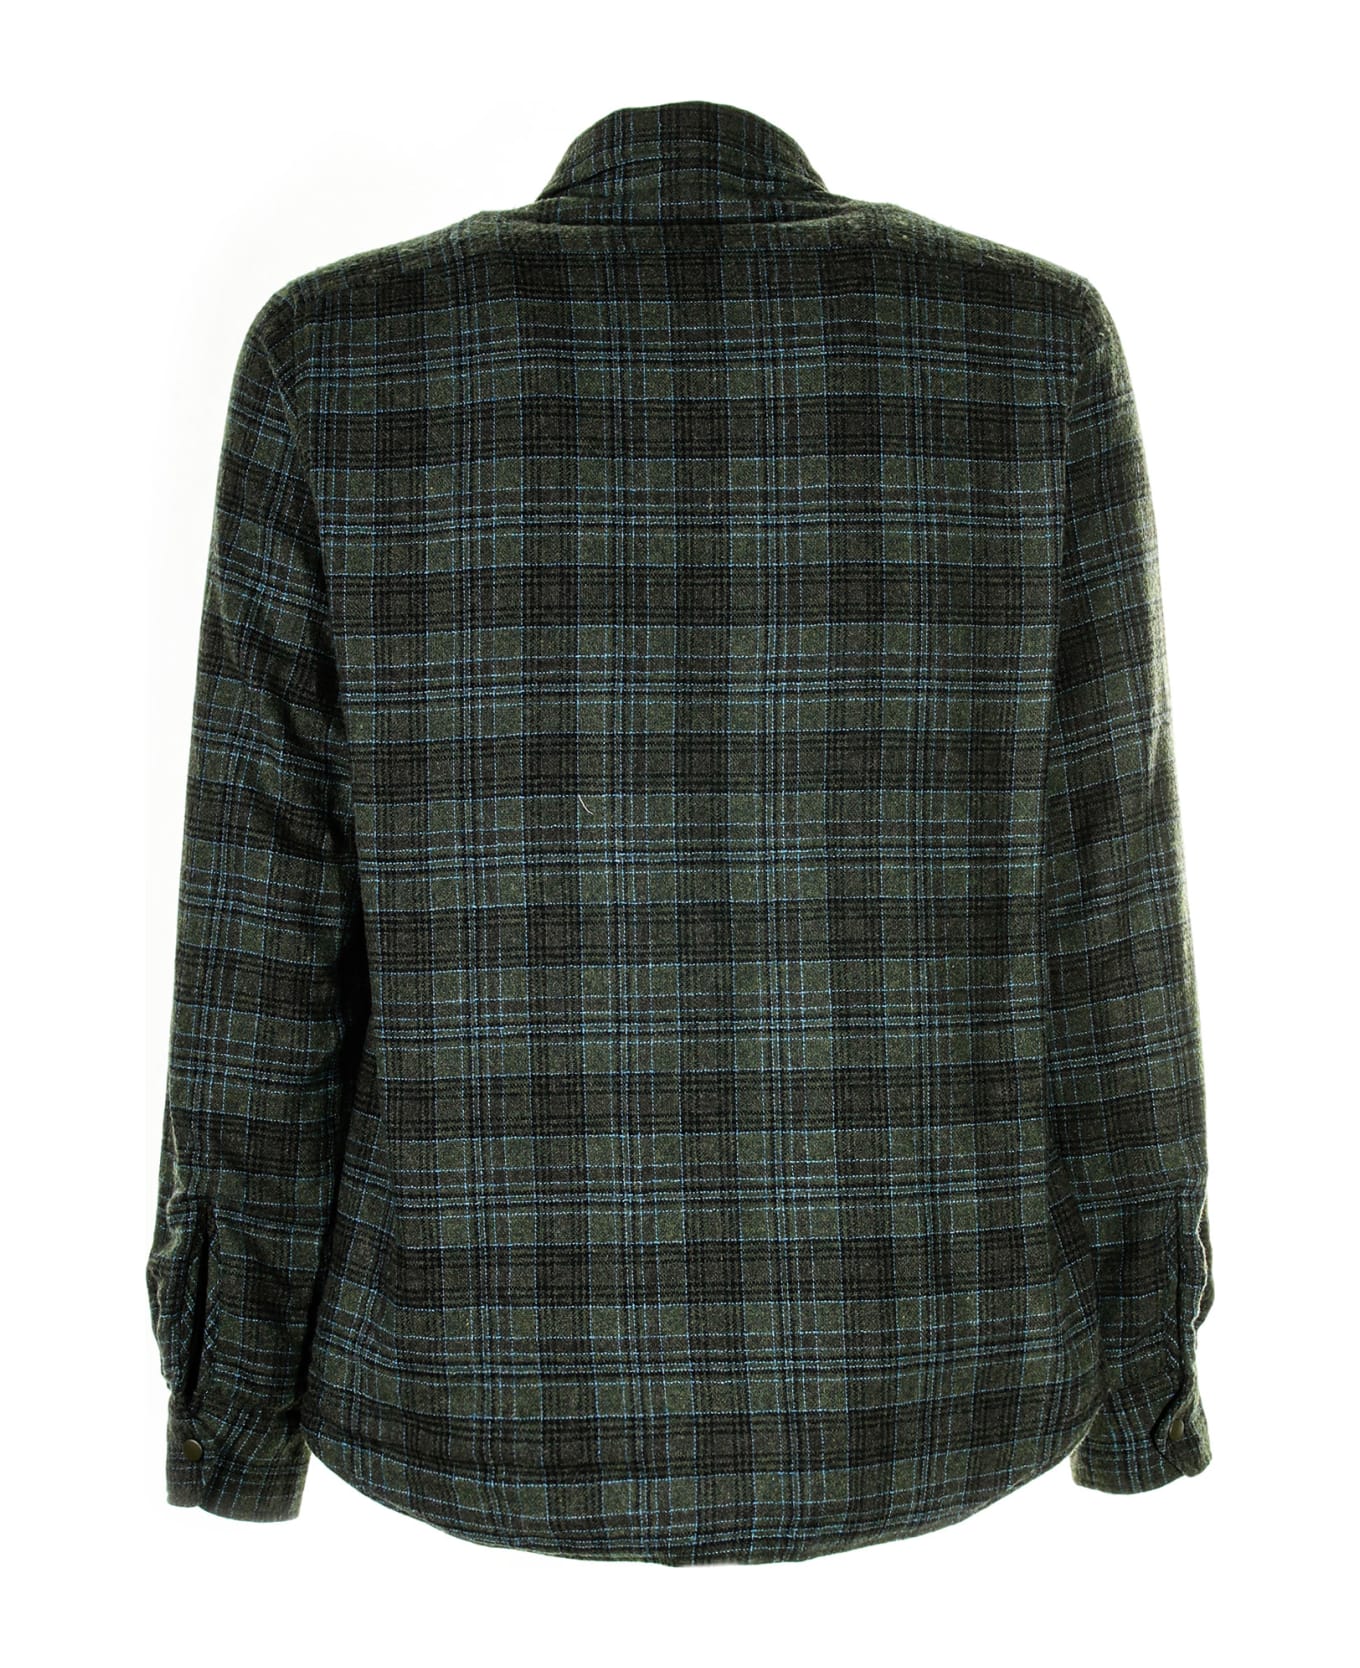 Aspesi Shirt With Checked Pattern - MILITARE